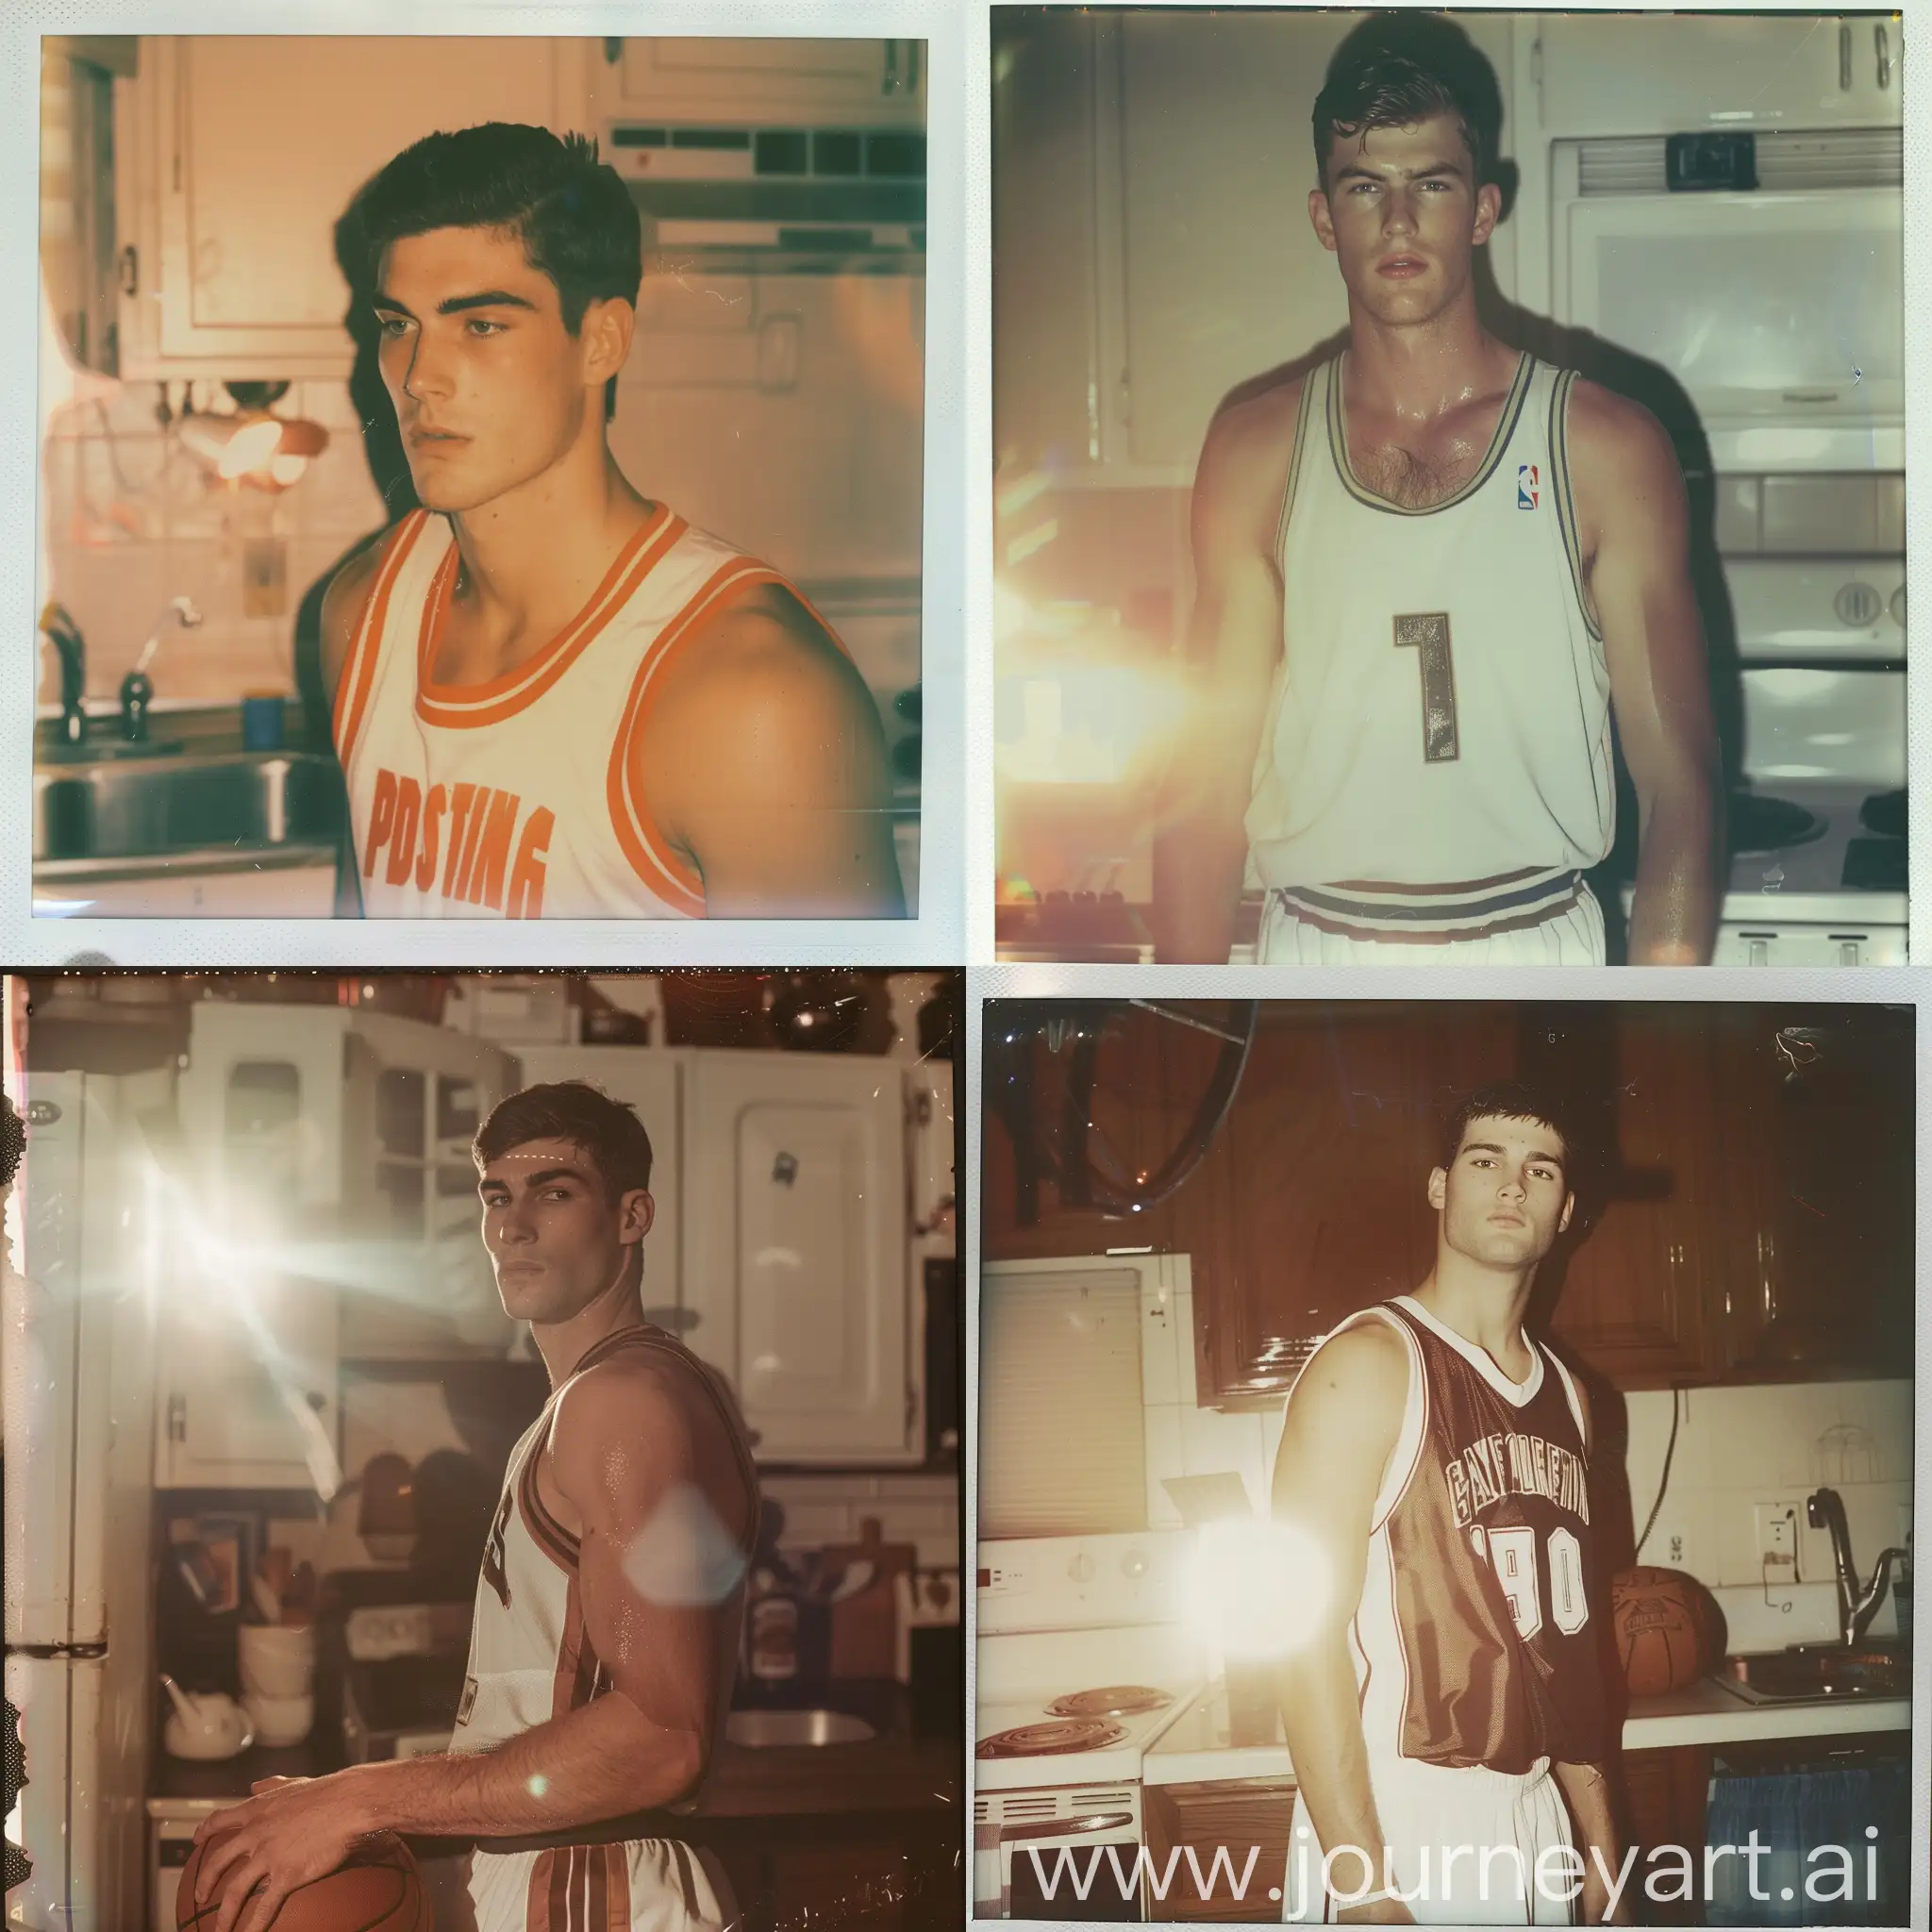 male model, 90th photos from photo album, film, vintage style, man in basketball uniform, on the kitchen, flash from camera, Polaroid, hyper realistic